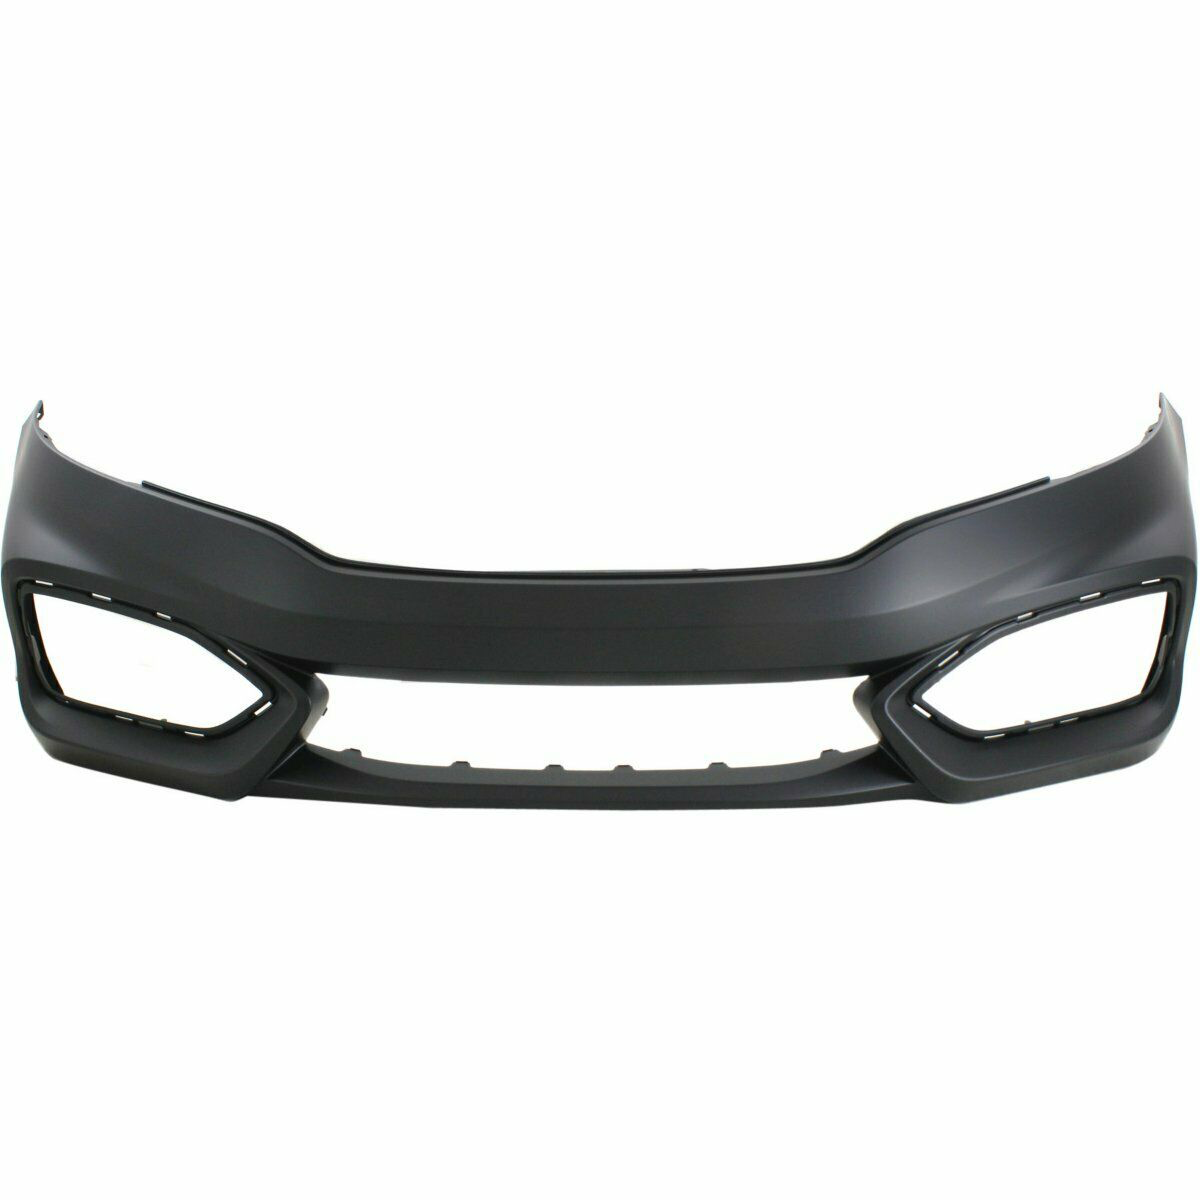 2014-2015 HONDA CIVIC COUPE Front Bumper 1.8L Painted to Match